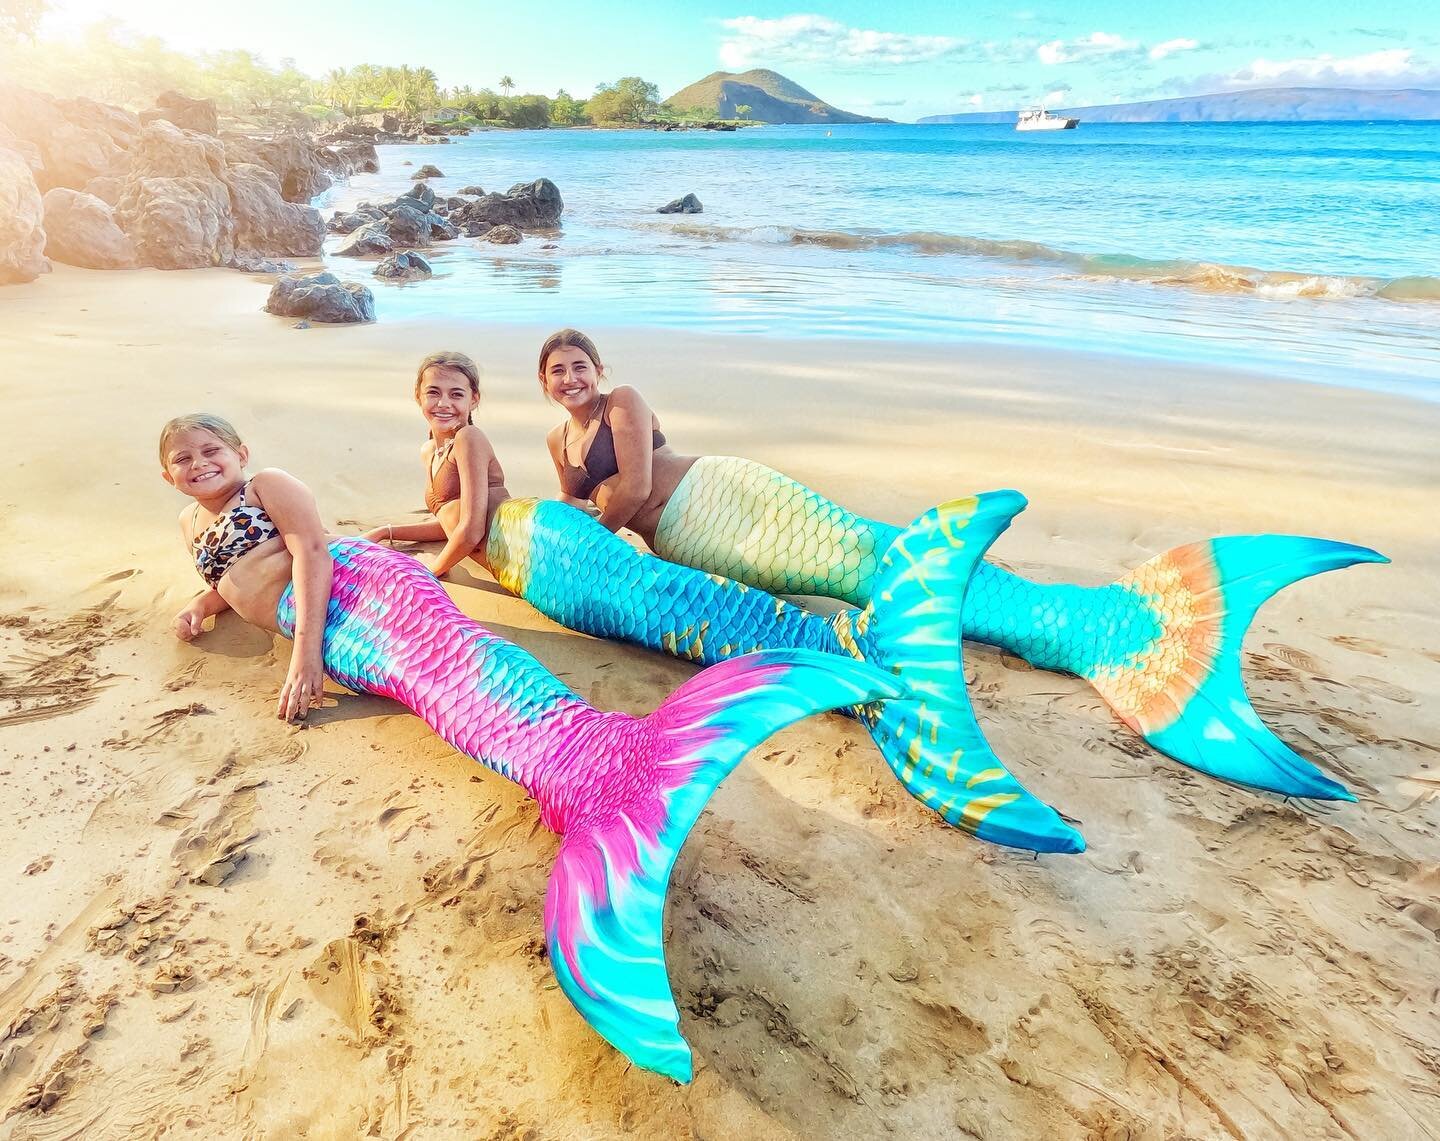 ✨👸🏽 Mermaid Sisters!! An amazing swimming lesson with Laynee, Sophia, and Kyrstin from California! These sisters were so graceful &amp; natural in their tails - no doubt born to be in the sea. 😊

#maui #mauihawaii #hawaii #mauiactivities #mauitour